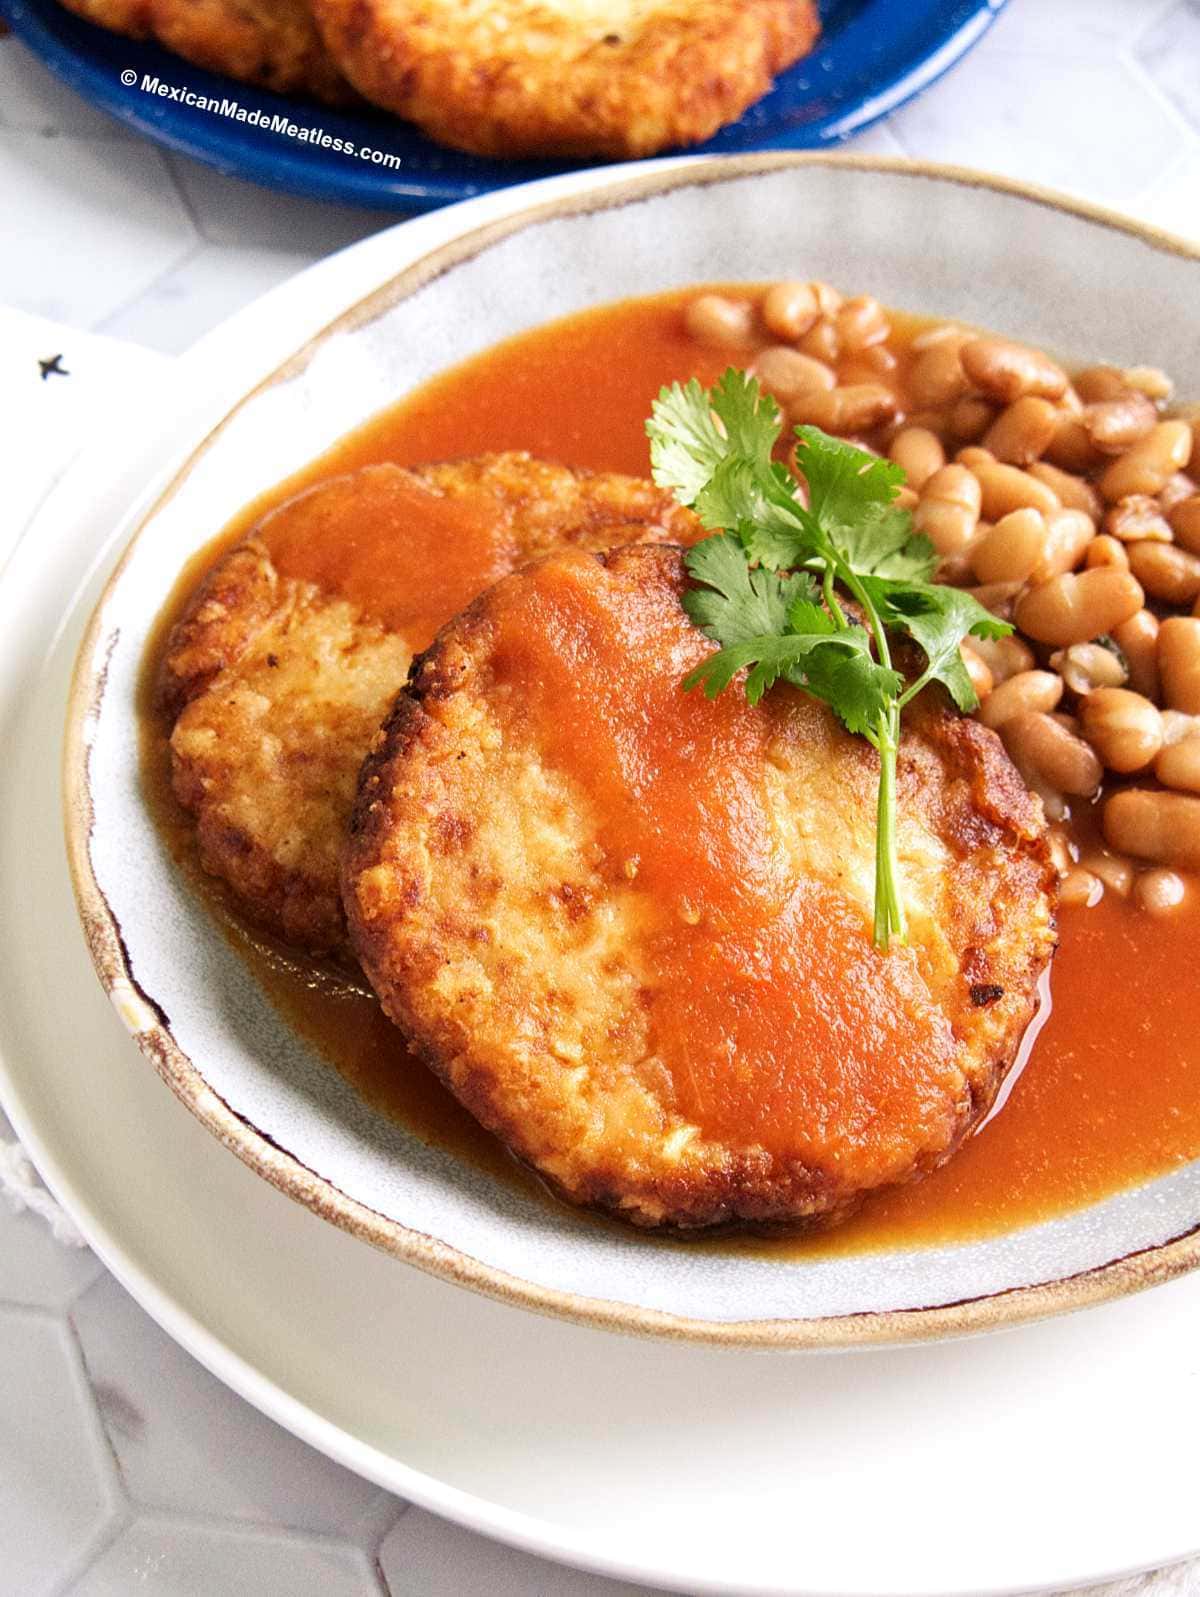 A white plate with tomato salsa and boiled pinto beans and two crispy Mexican potato cakes.